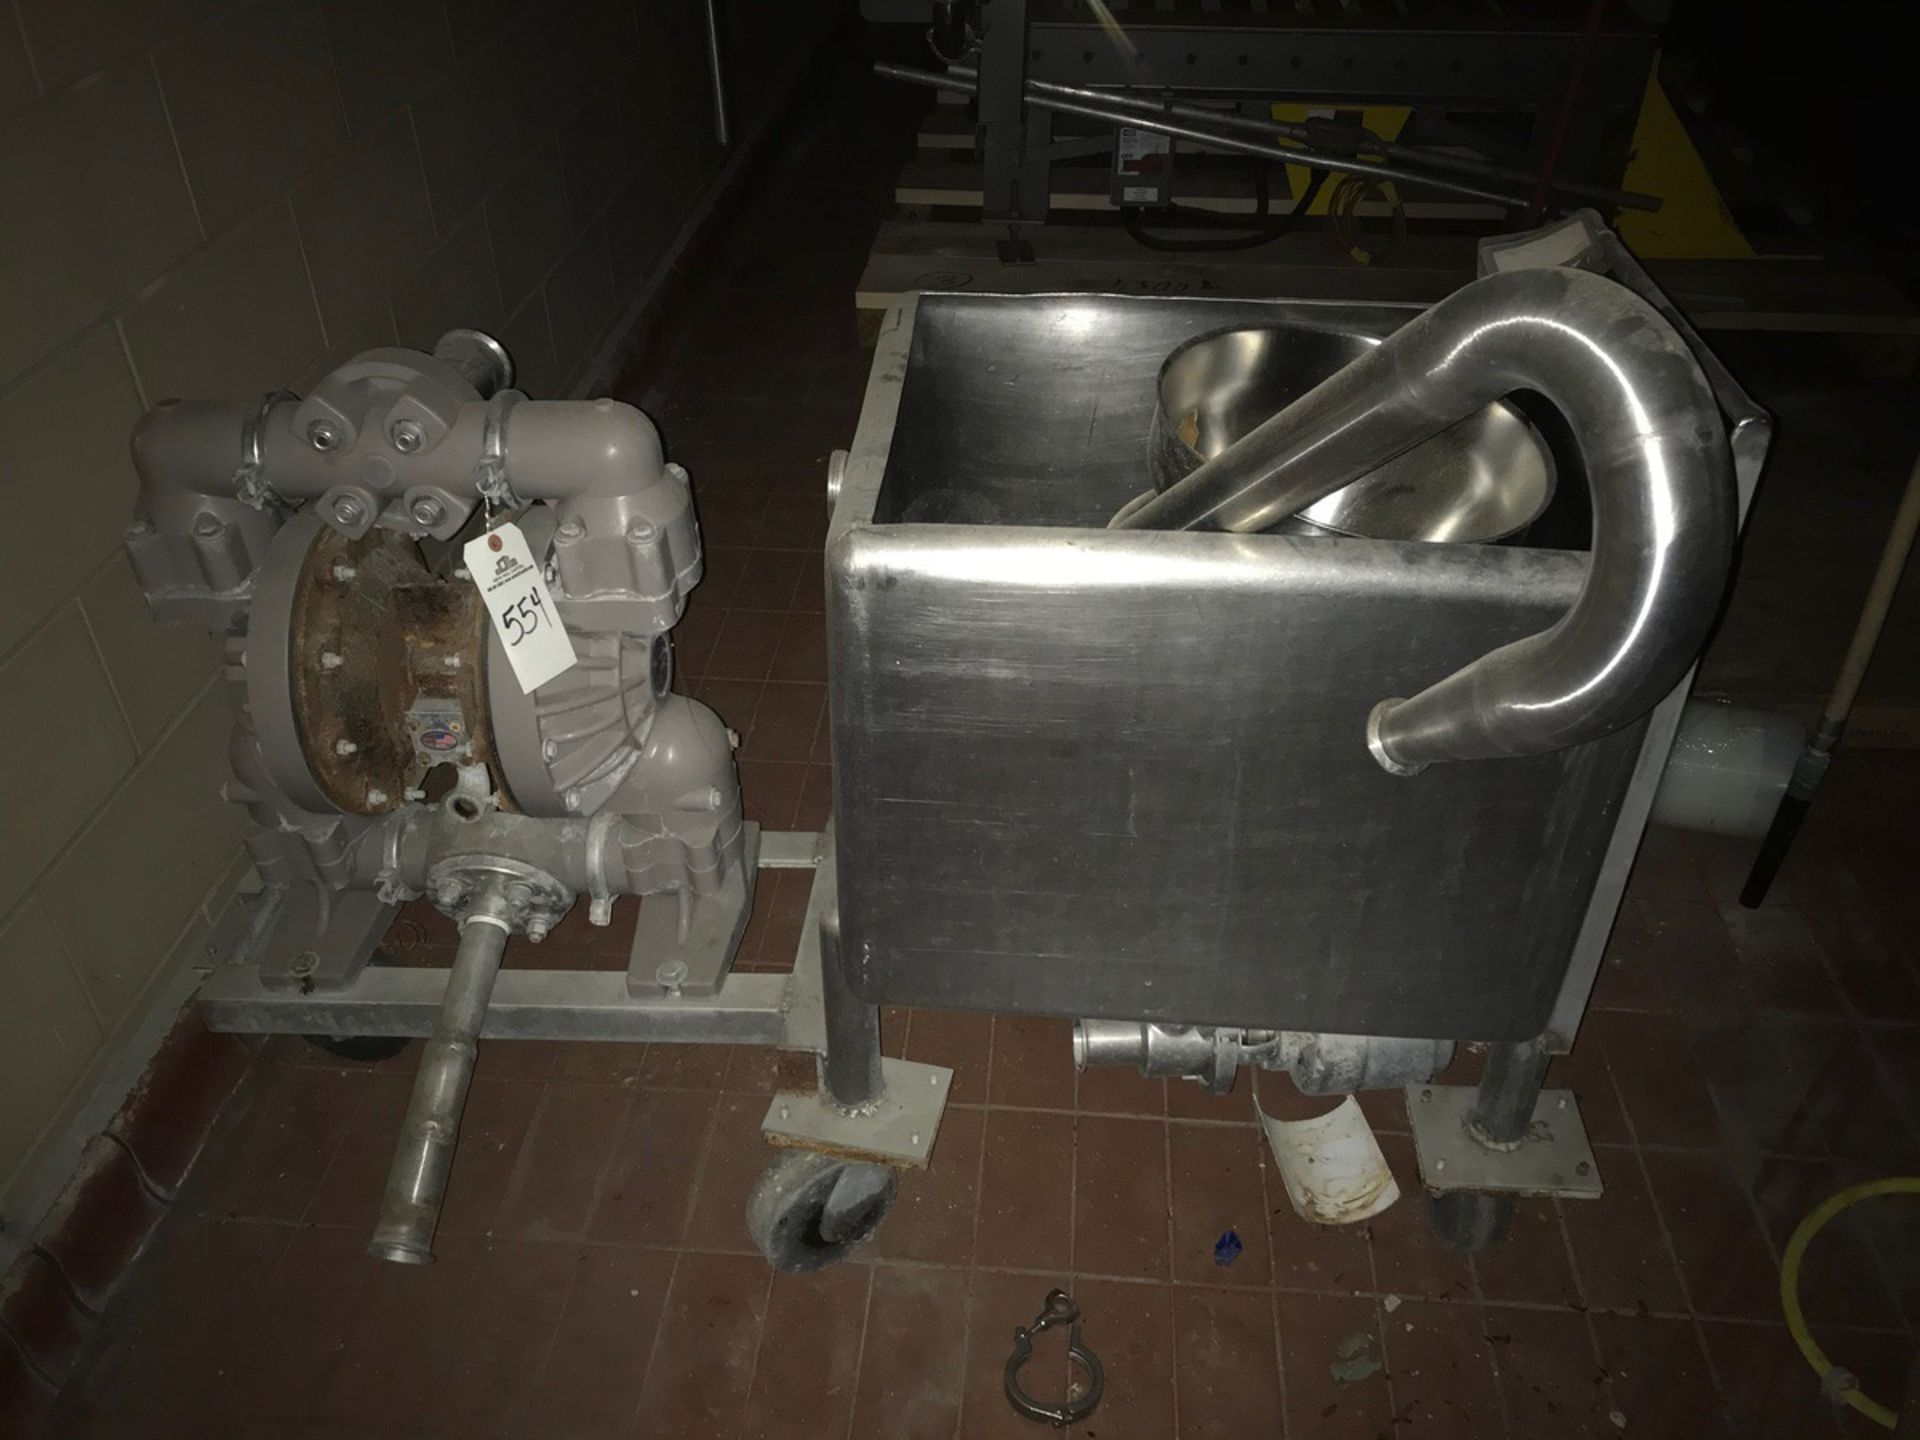 PNEUMATIC PUMP AND STAINLESS STEEL RECTANGULAR TANK. APPROX 19IN X 23IN X 19IN DEEP | Rig Fee $125